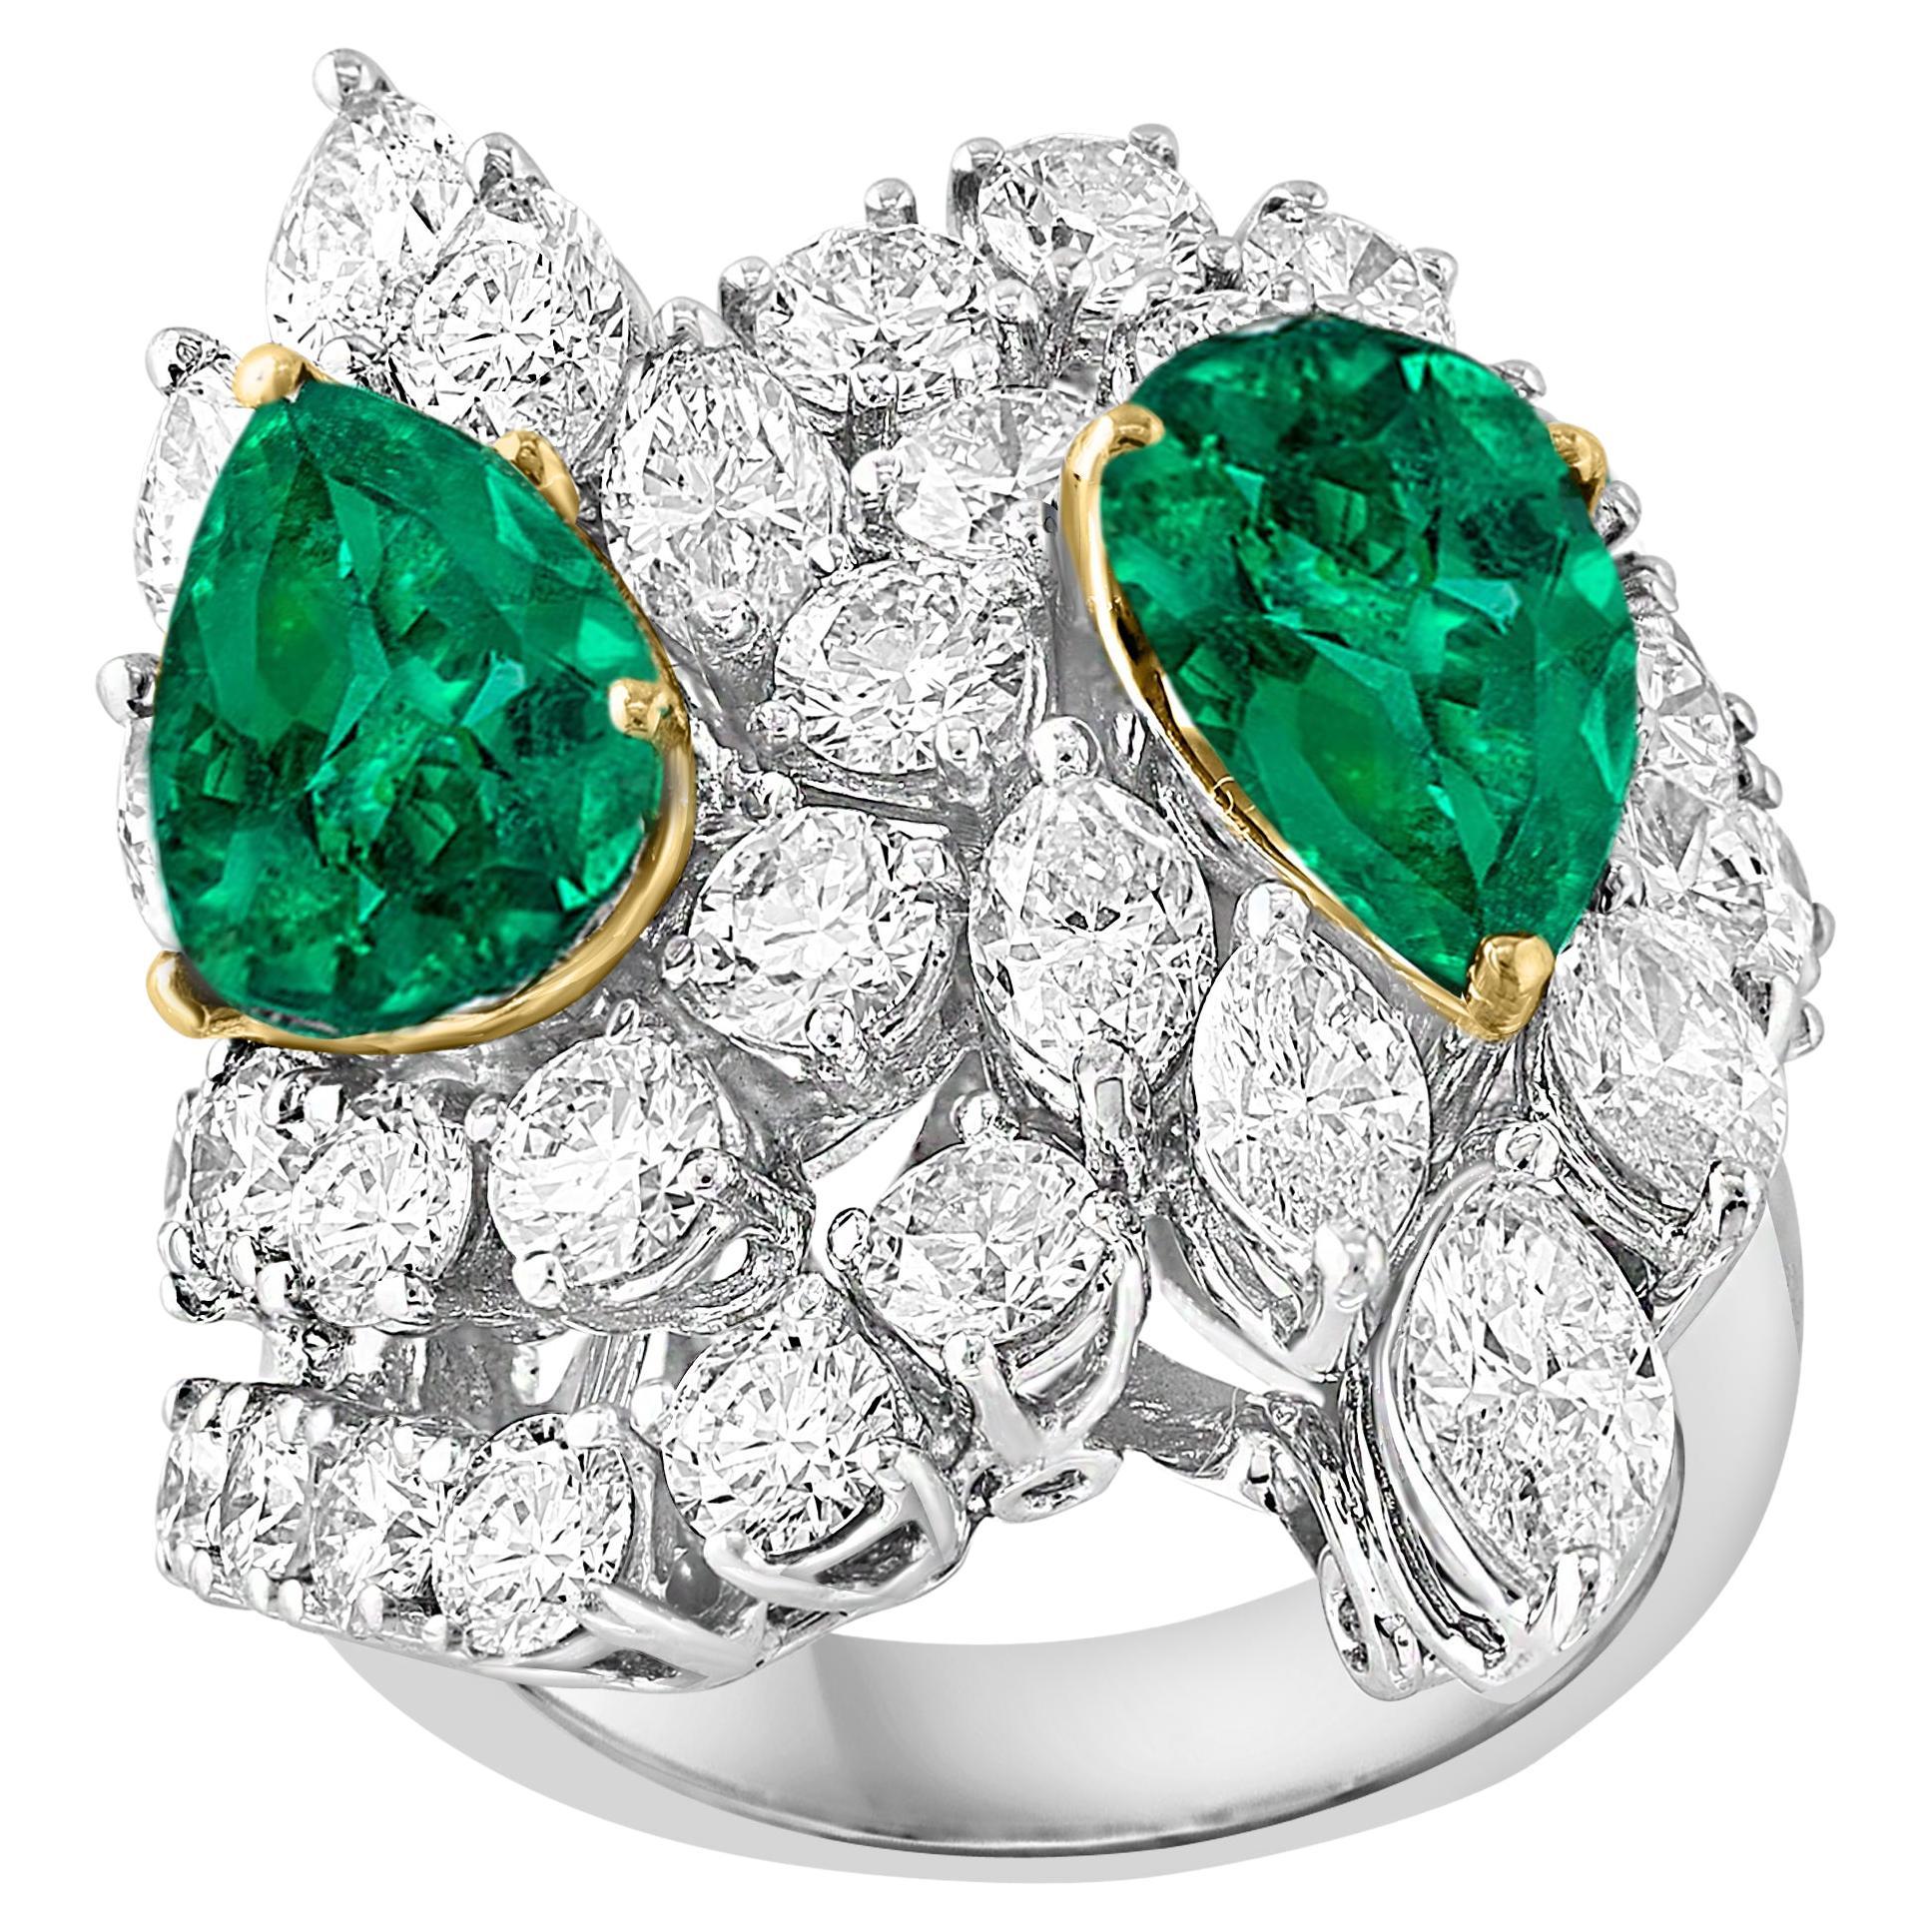 Two Pear shape 5.5 Ct Emerald  & 8.5 Ct Diamond Ring,  18K White Gold Size 6 For Sale